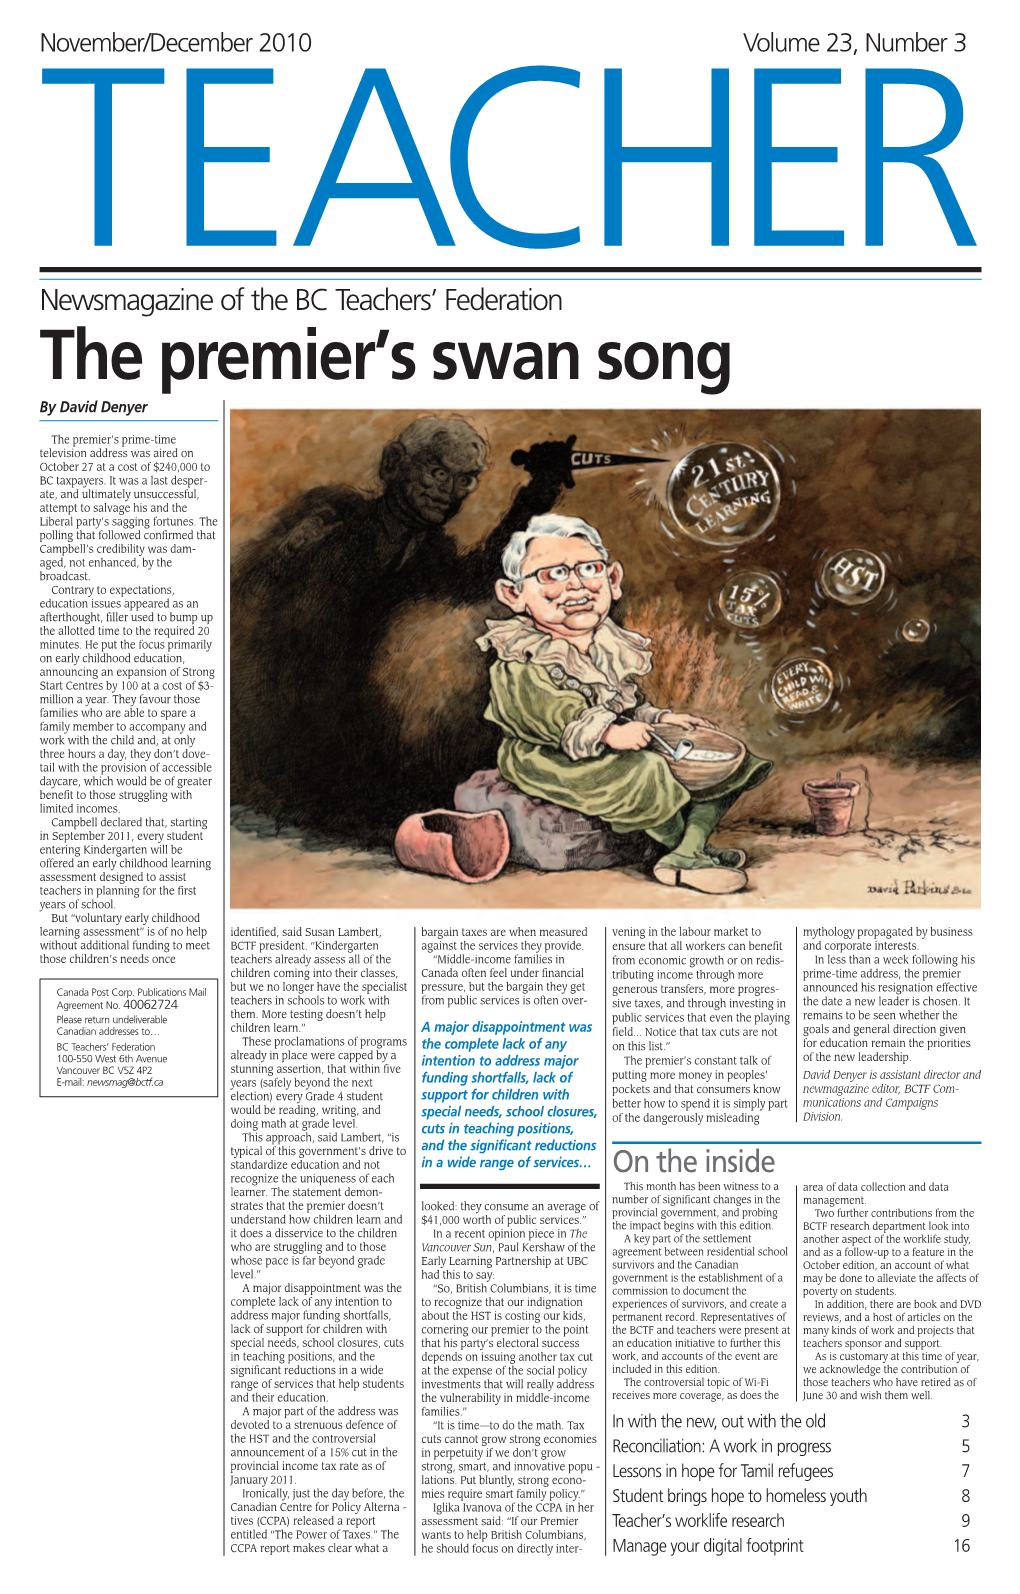 The Premier's Swan Song